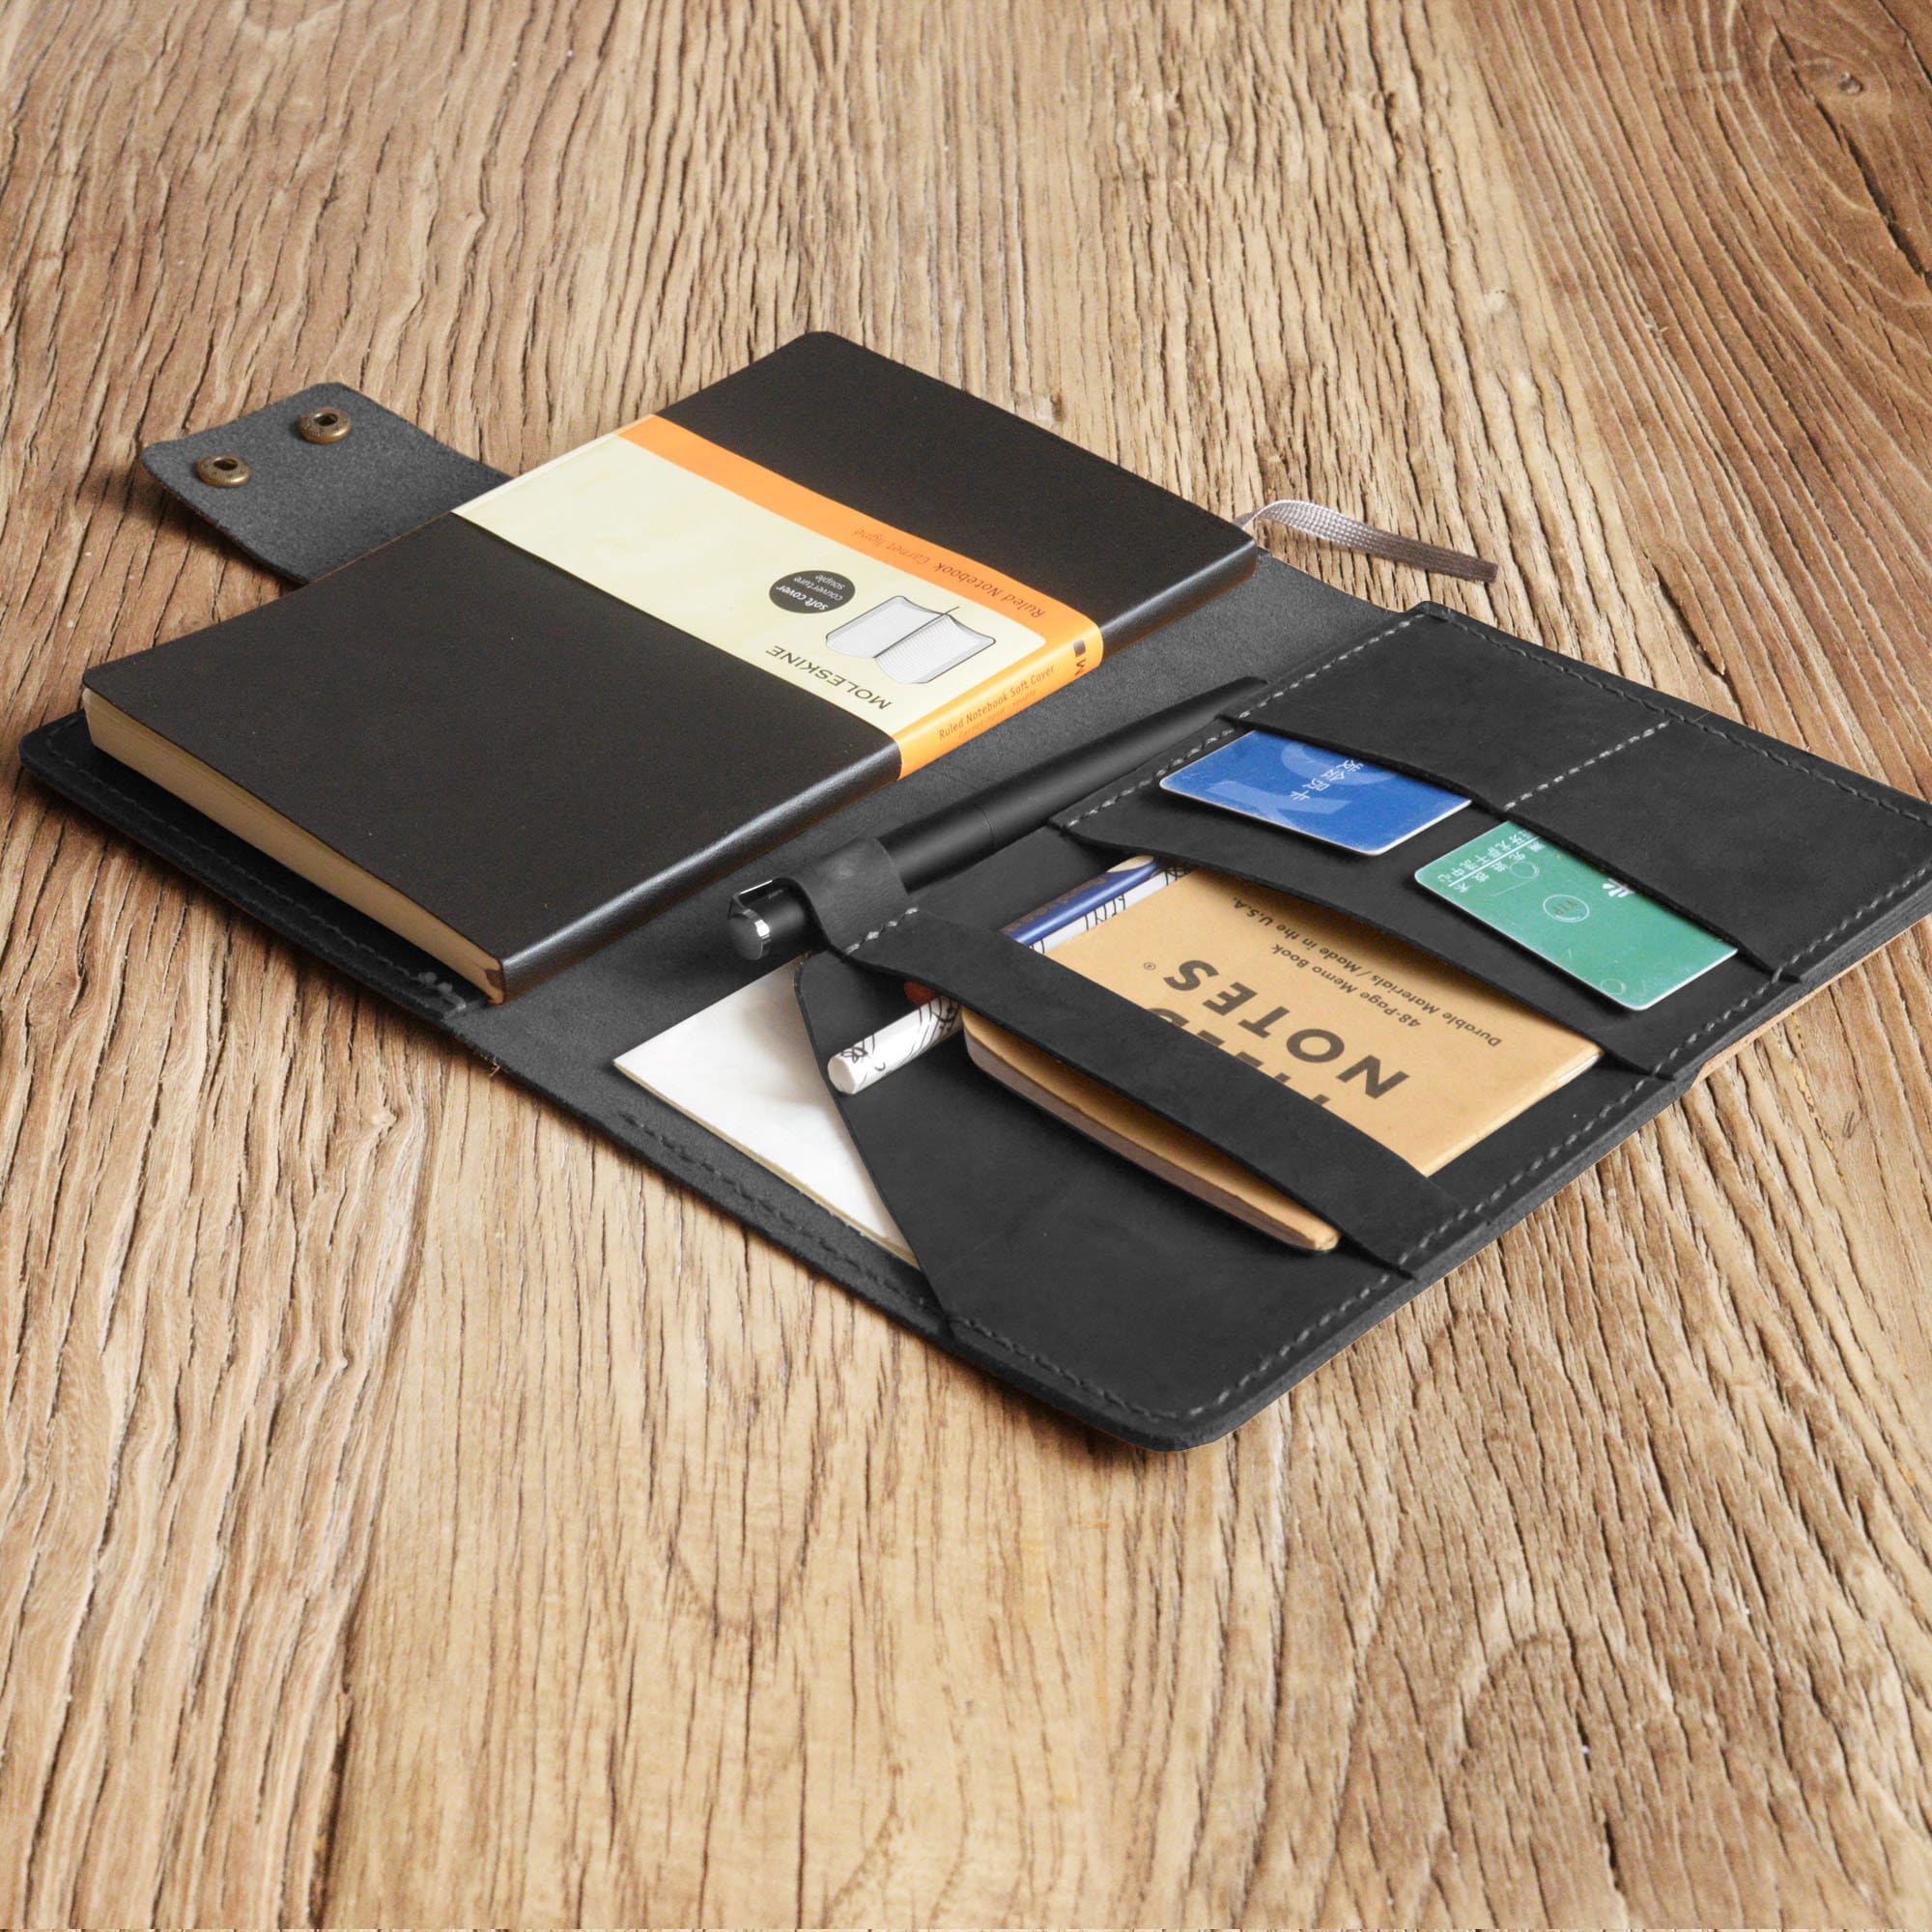 Moleskine classic softcover notebook - customisable by Noted in Style